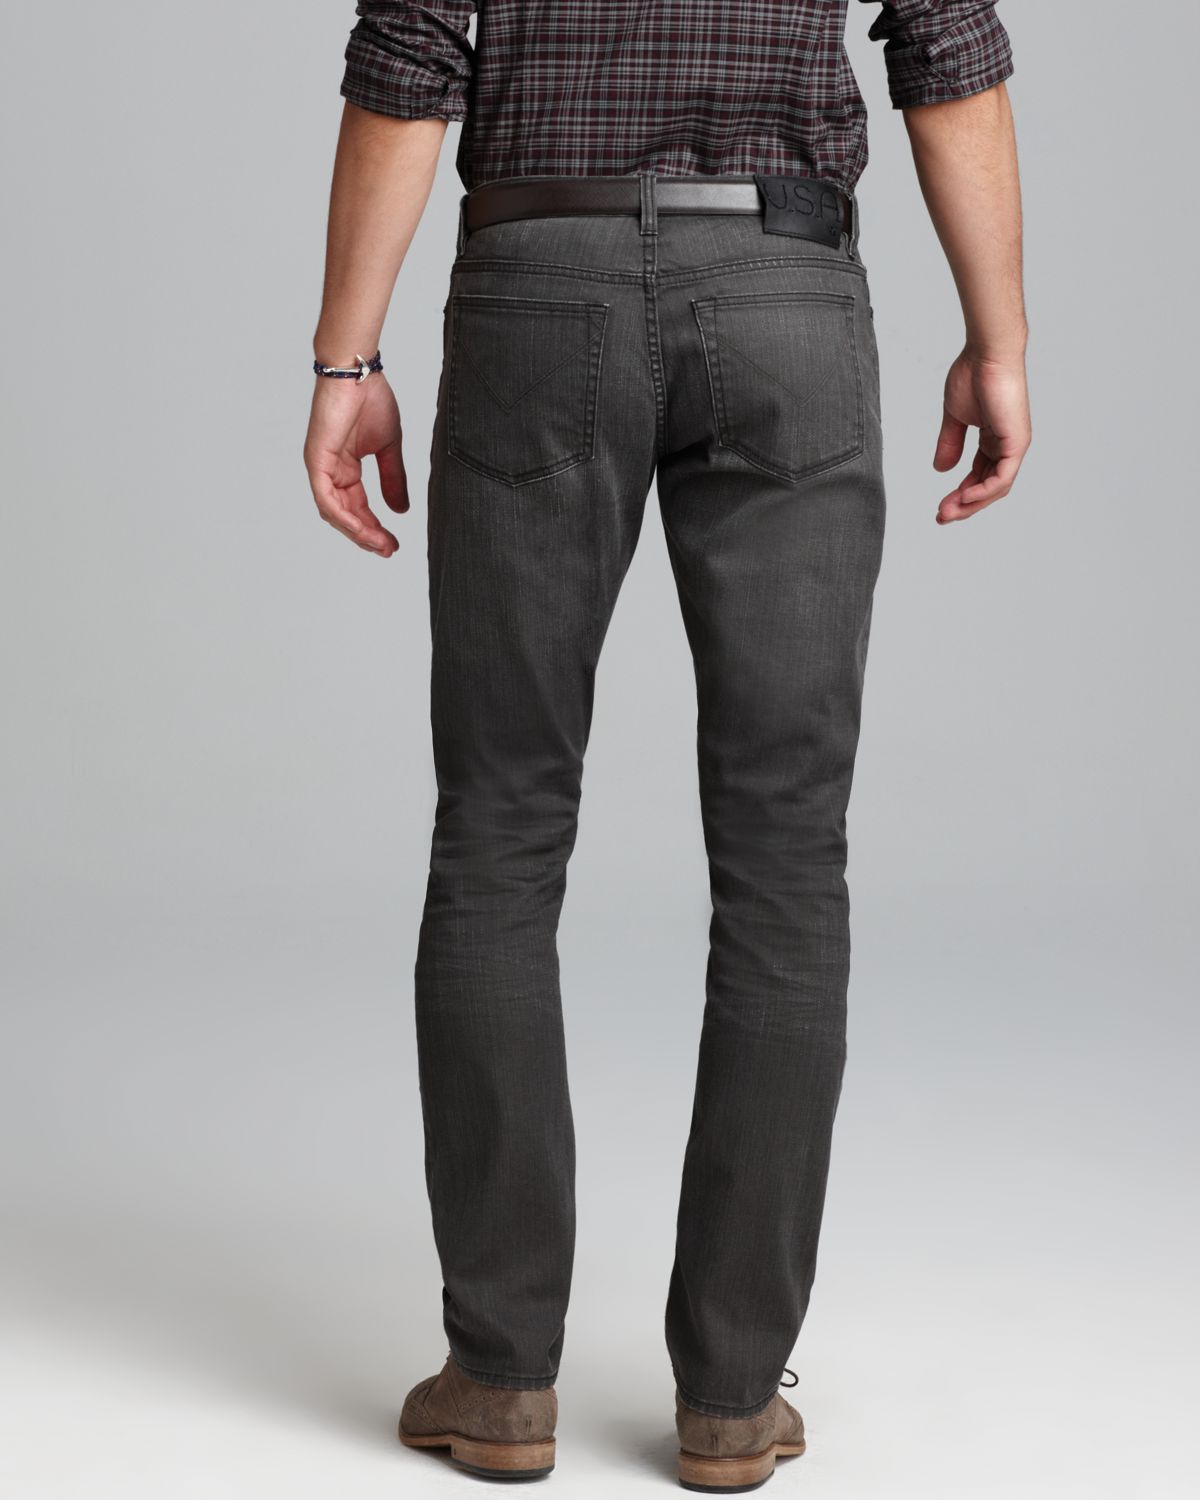 Lyst - John Varvatos Usa Jeans Bowery Straight Fit in Slate Gray in ...